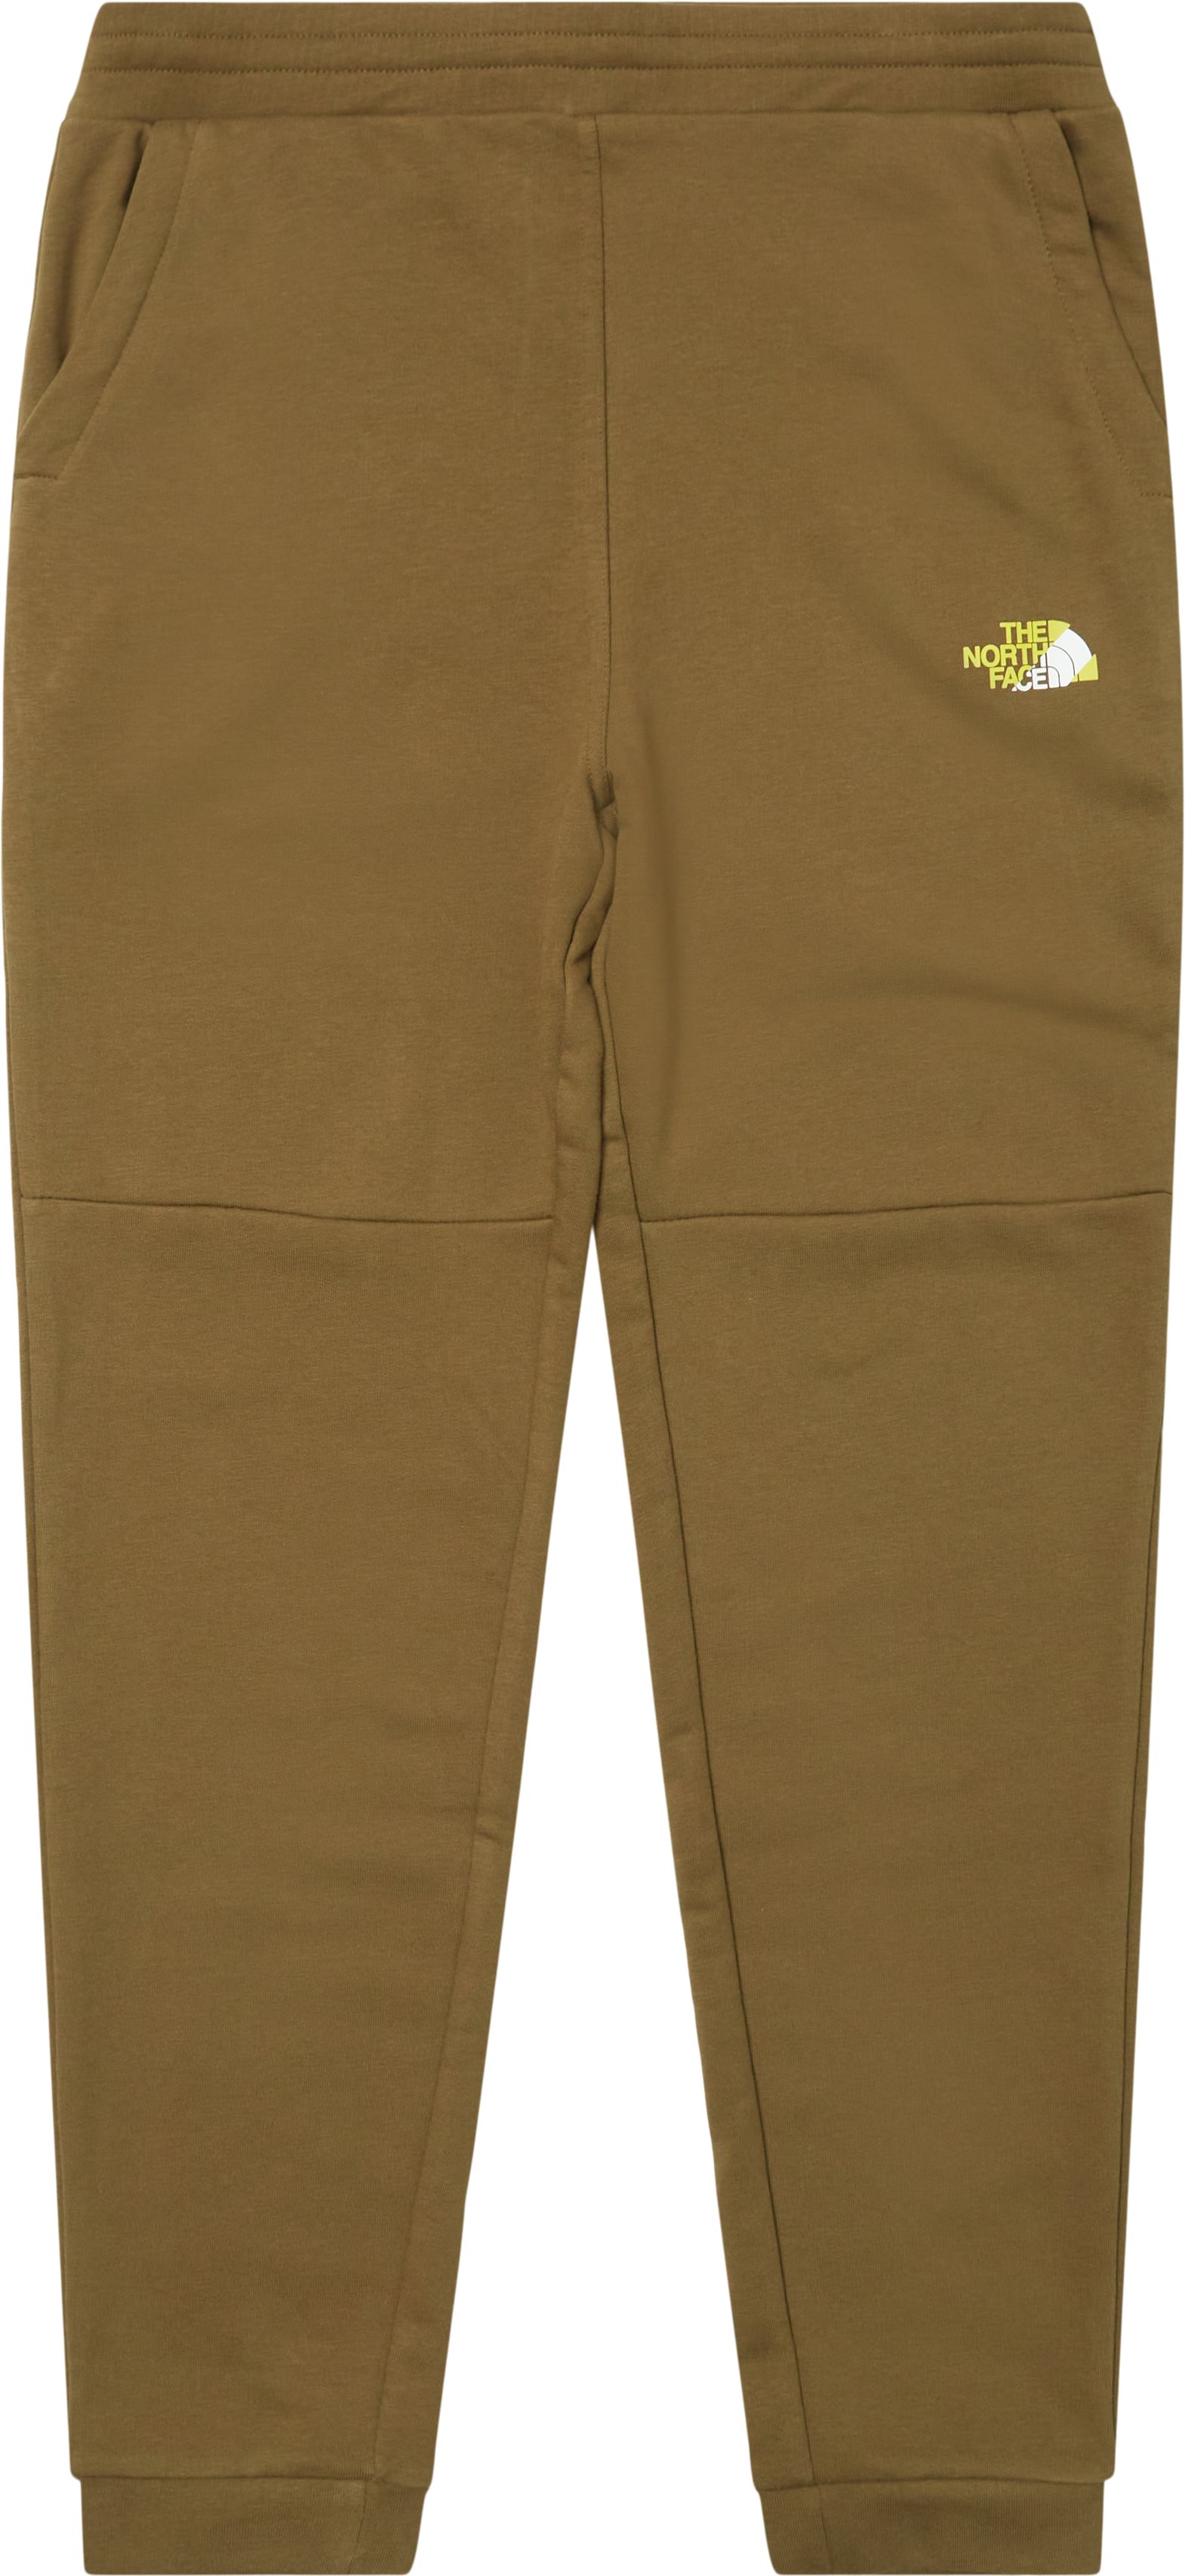 The North Face Trousers COORDINATES PANT Green